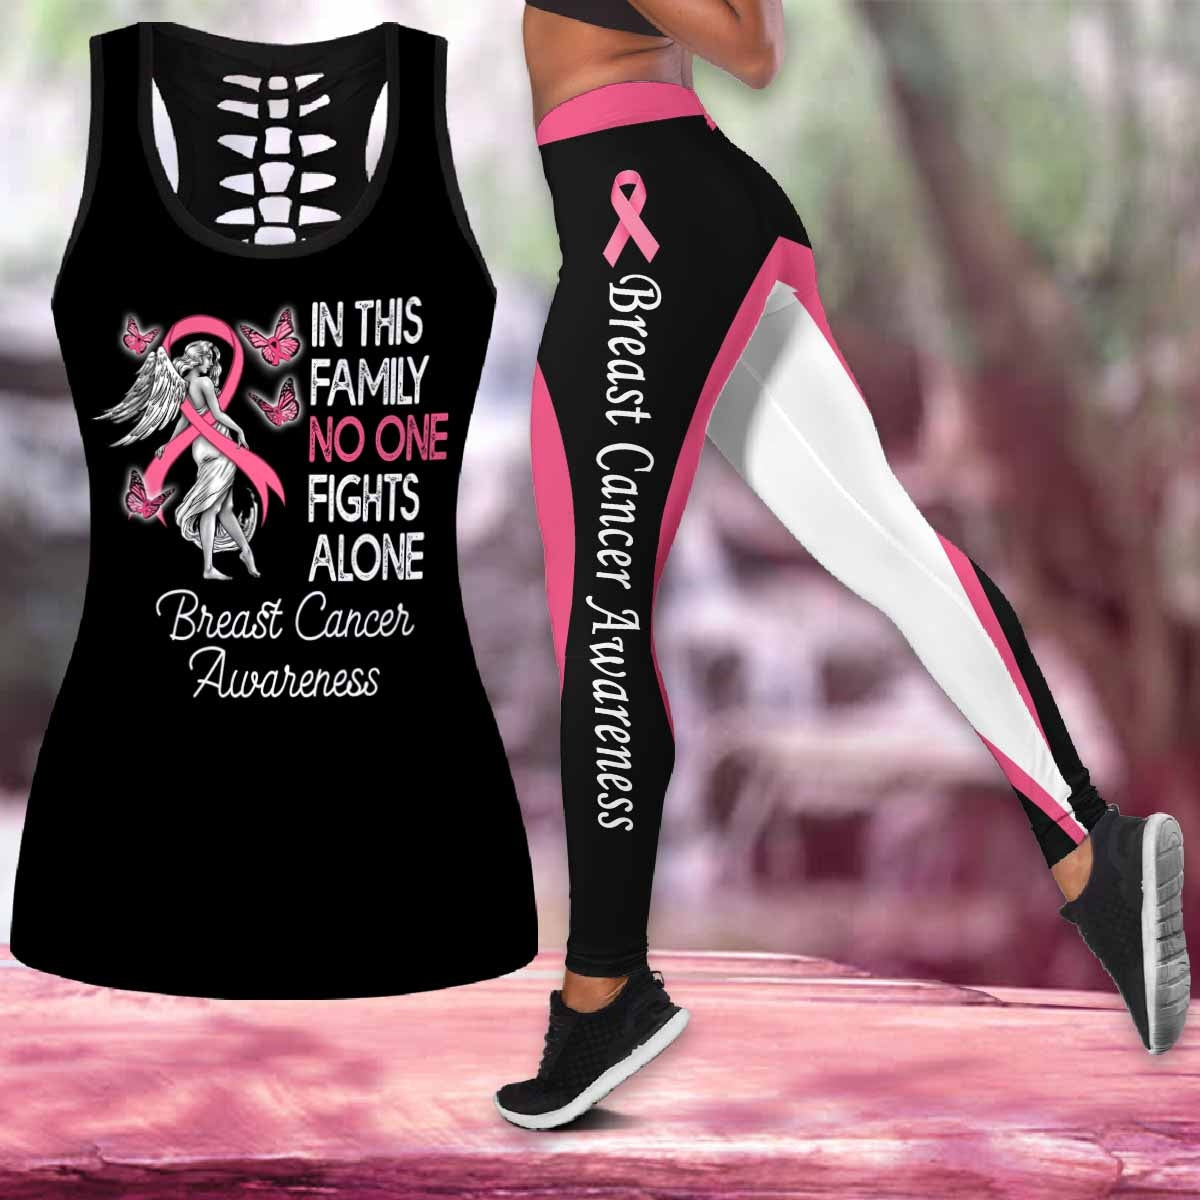 Breast Cancer In This Family No One Fights Alone Legging Tanktop, Breast Cancer Awareness Legging Tanktop